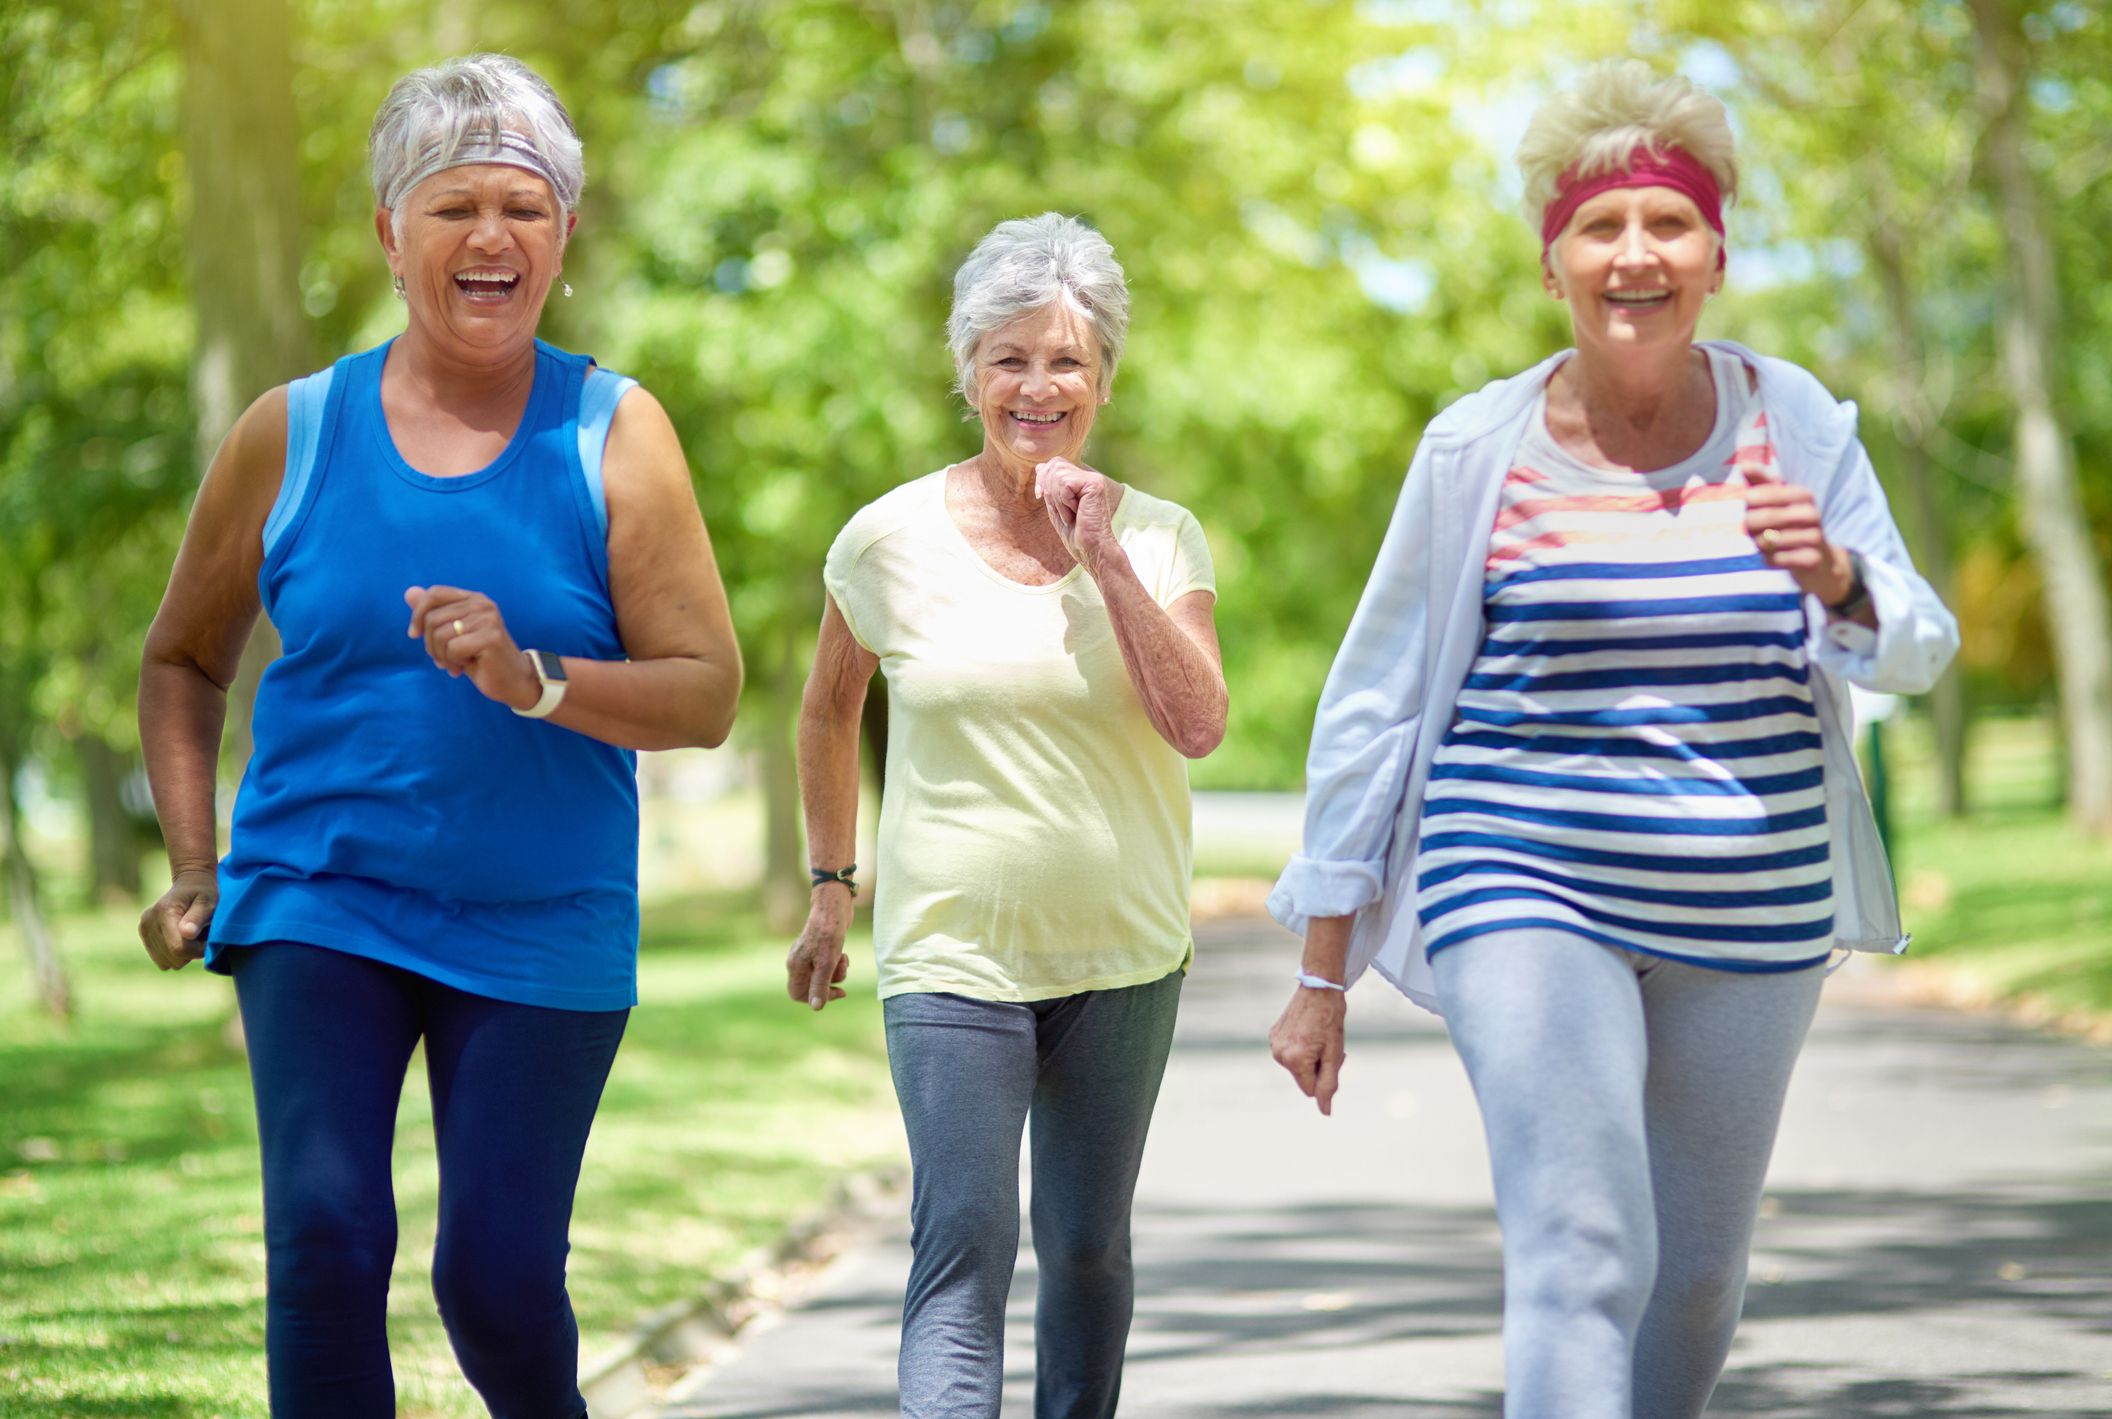 Three senior women jogging together in a serene park, promoting an active and healthy lifestyle.